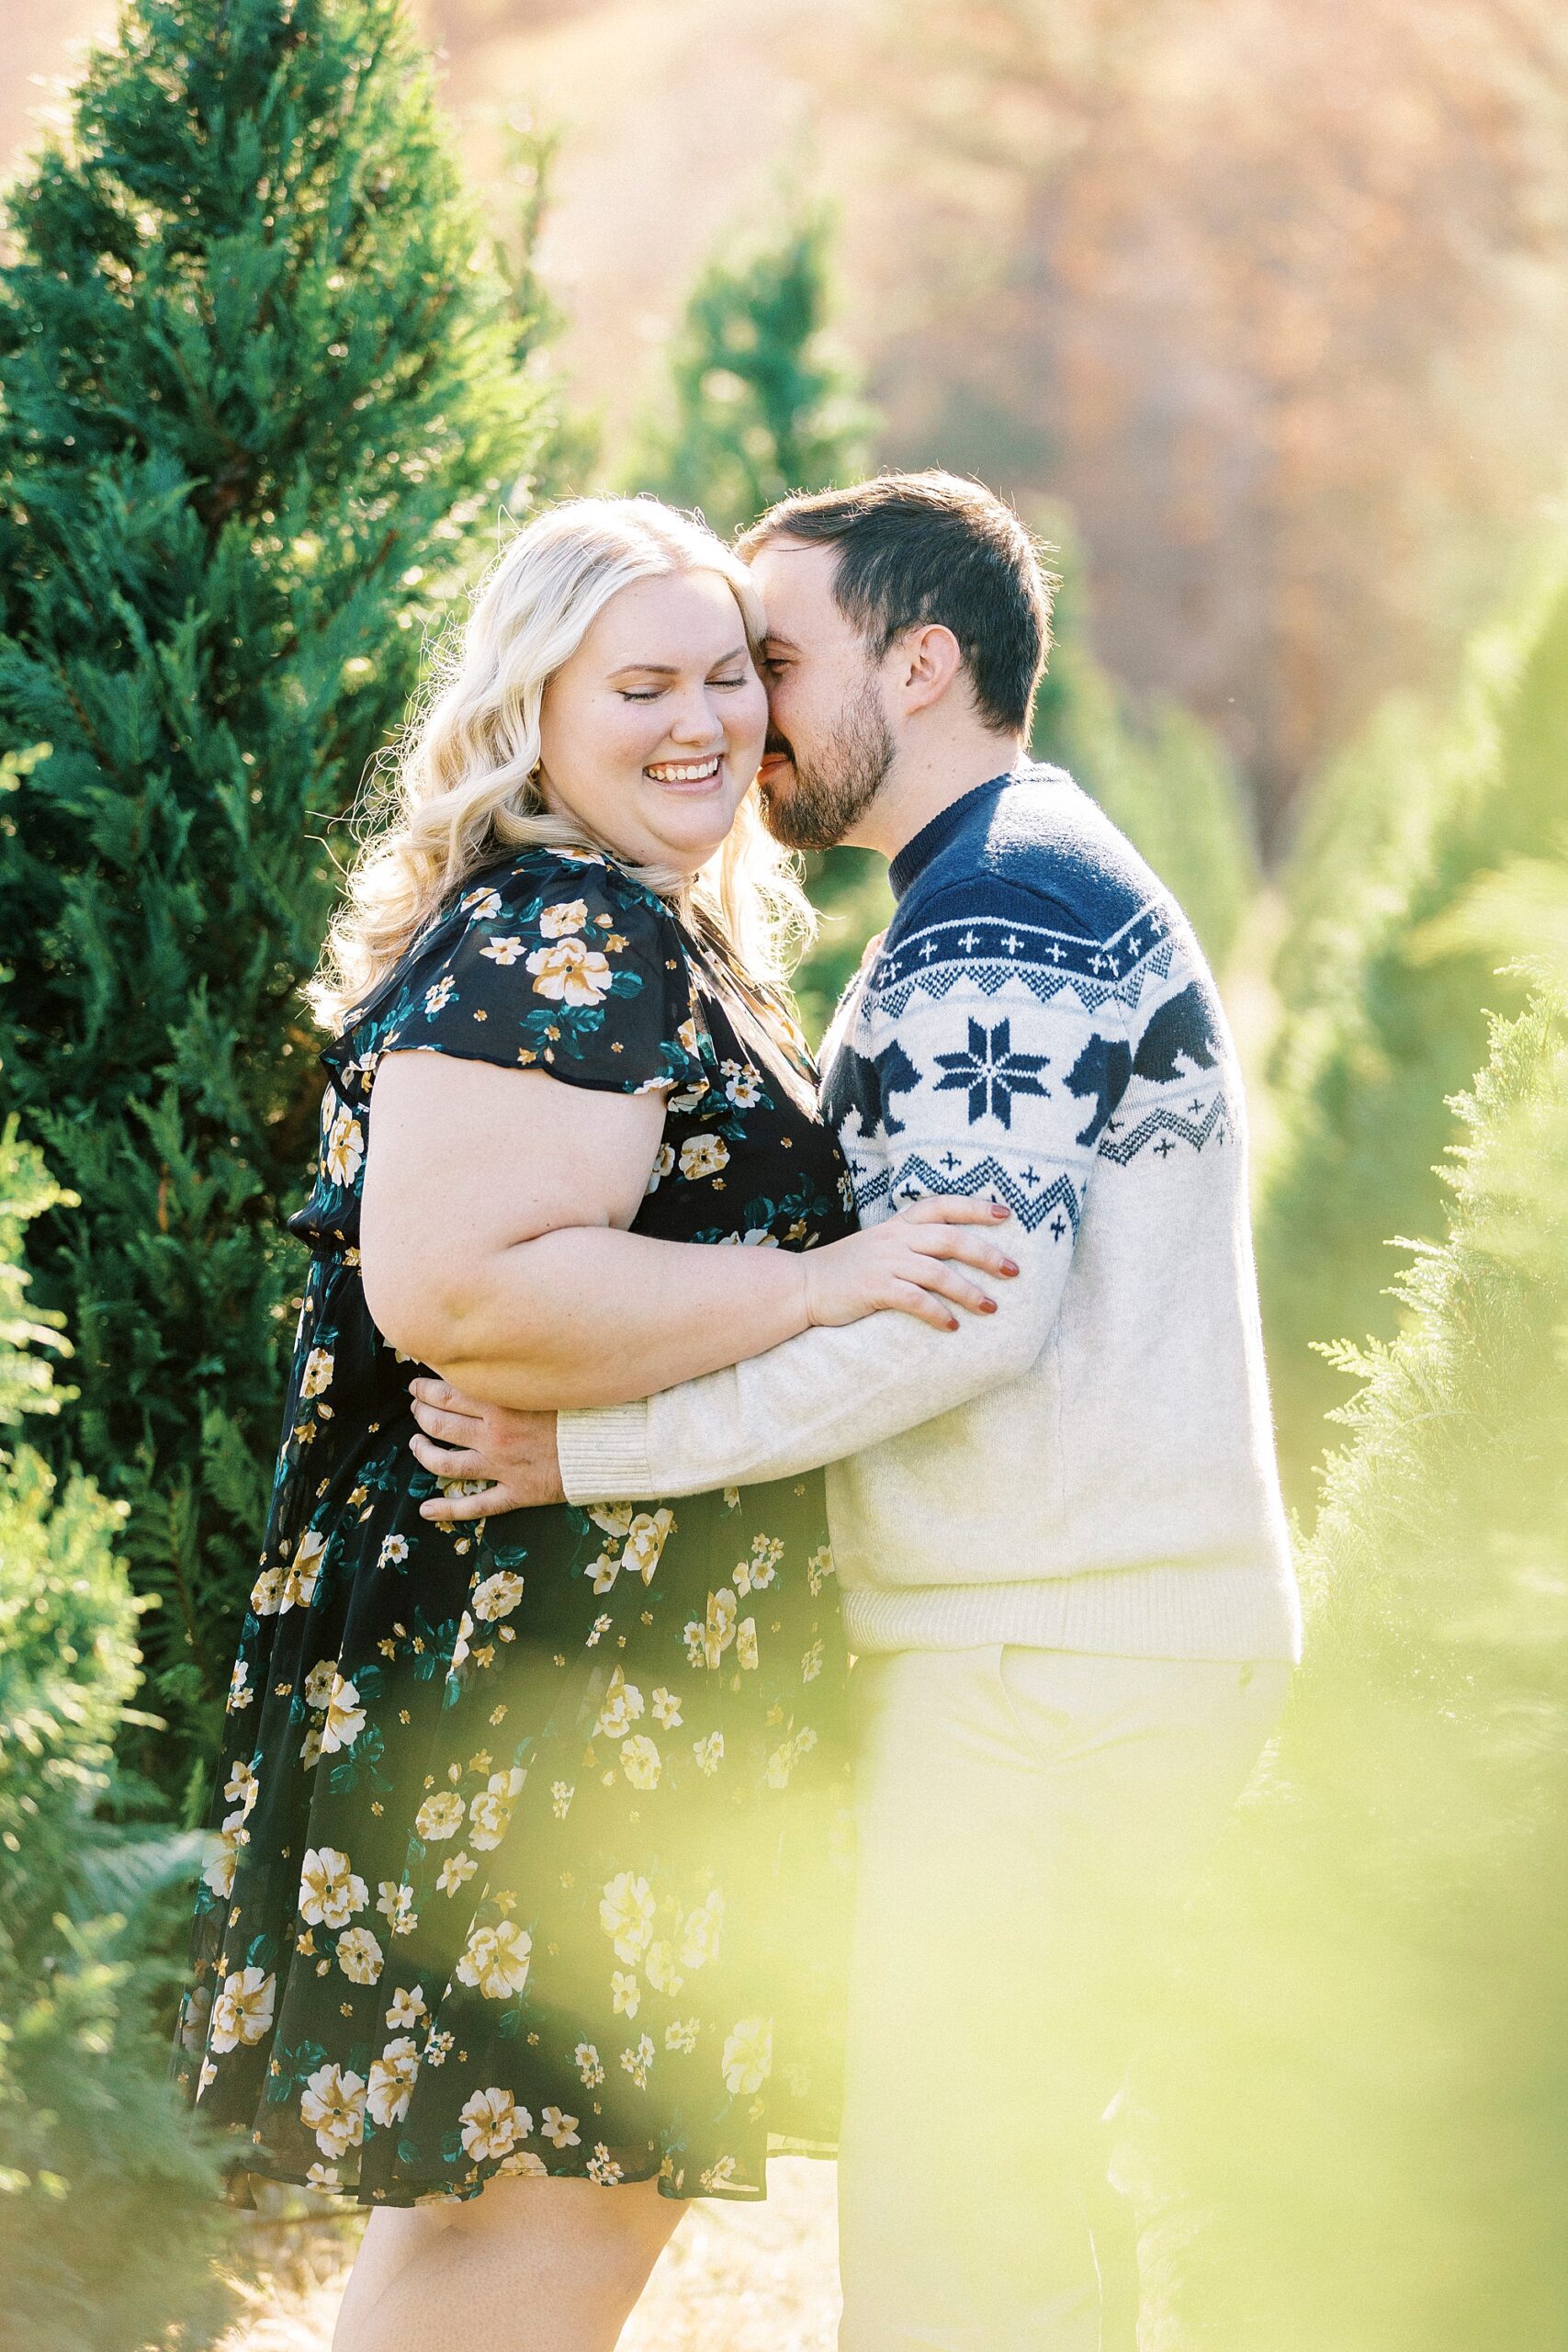 man nuzzles woman's cheek between Christmas trees during holiday mini sessions at tree farm